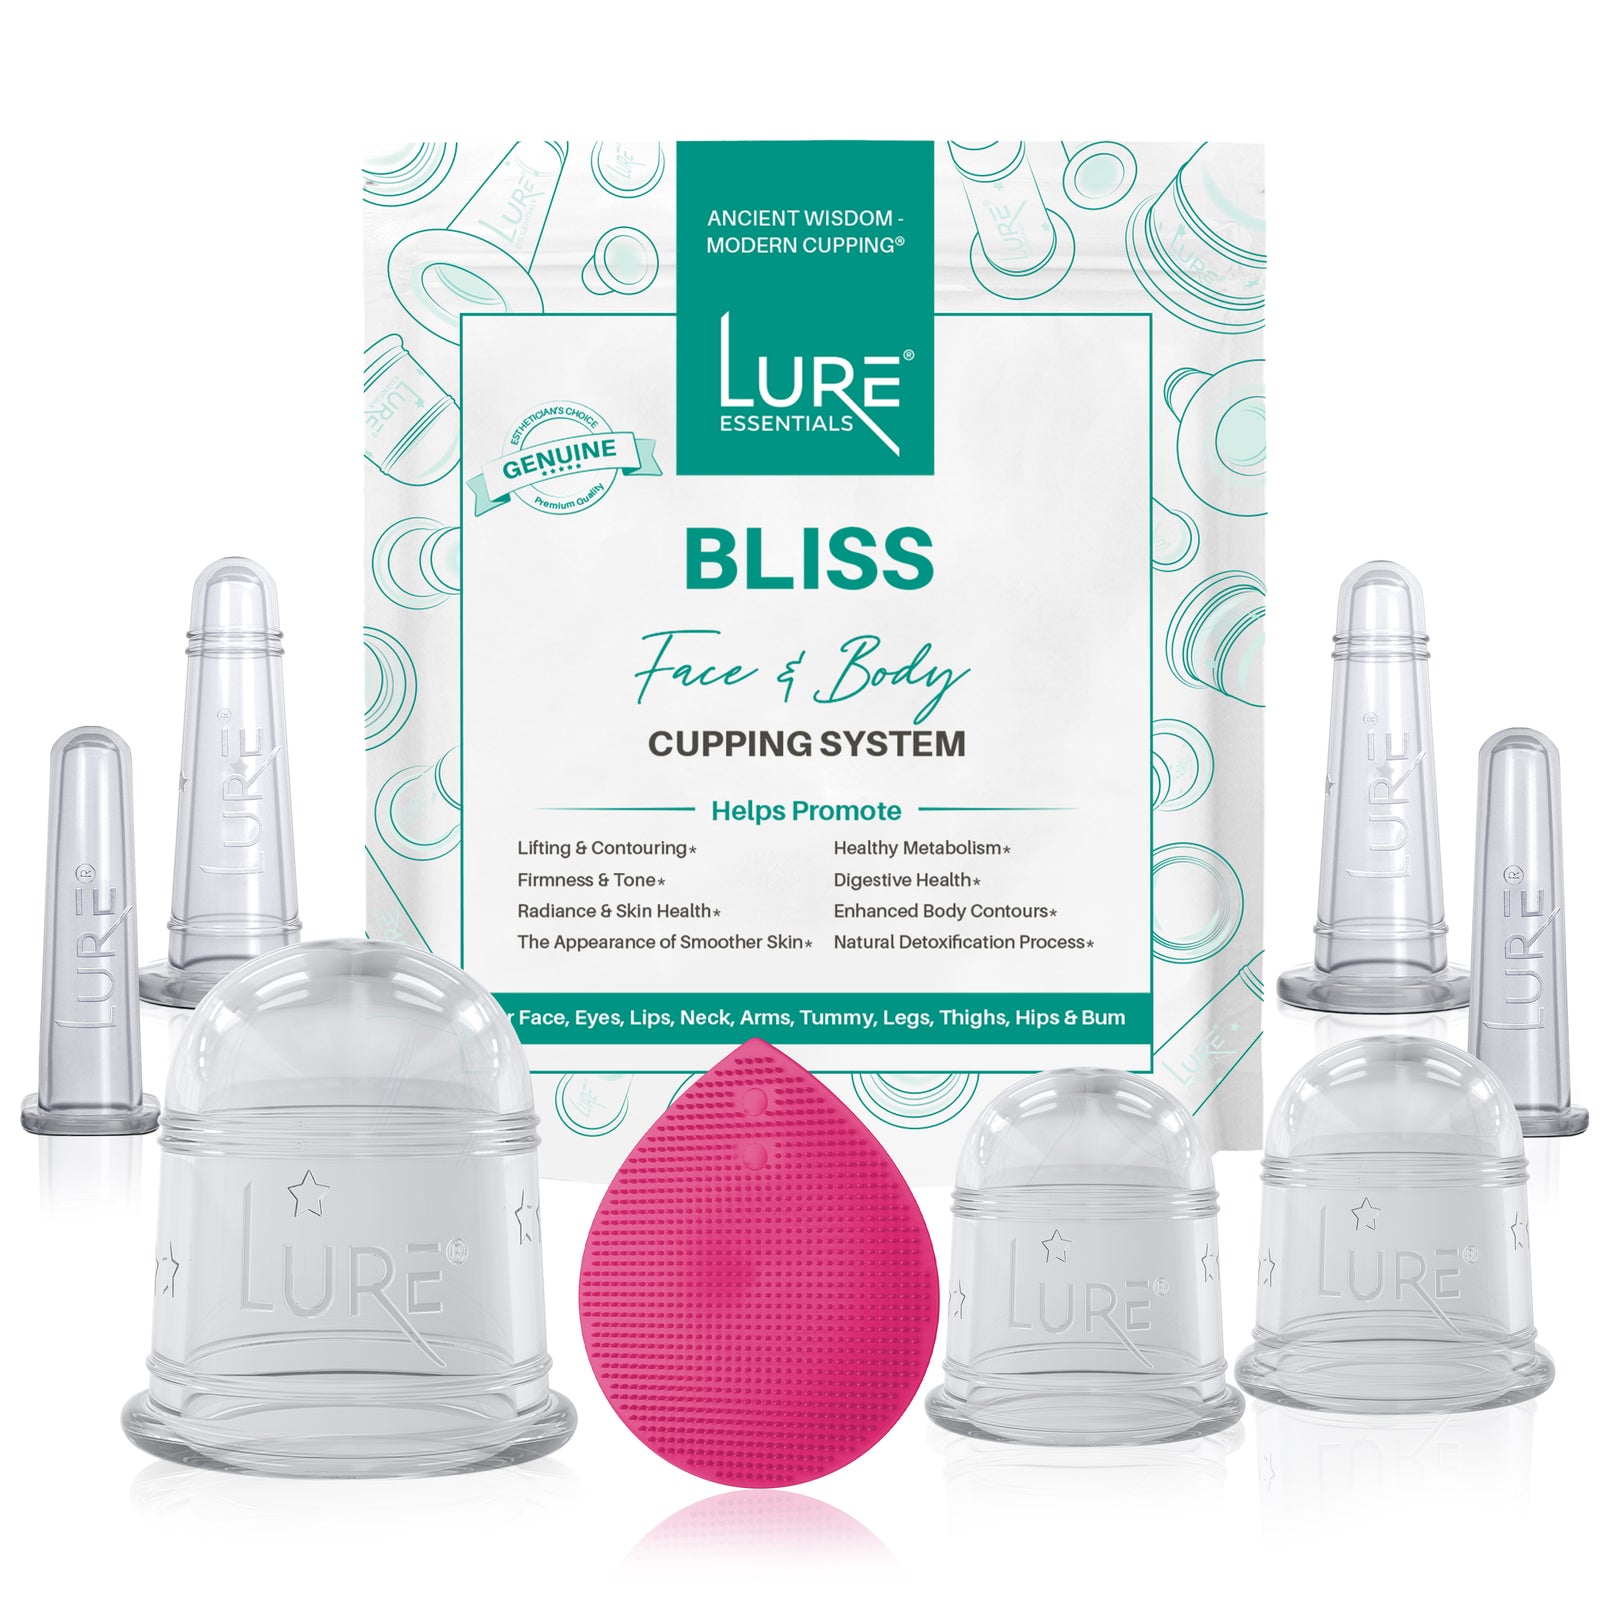 Cupping Sets and Therapy for Beauty - Lure Essentials